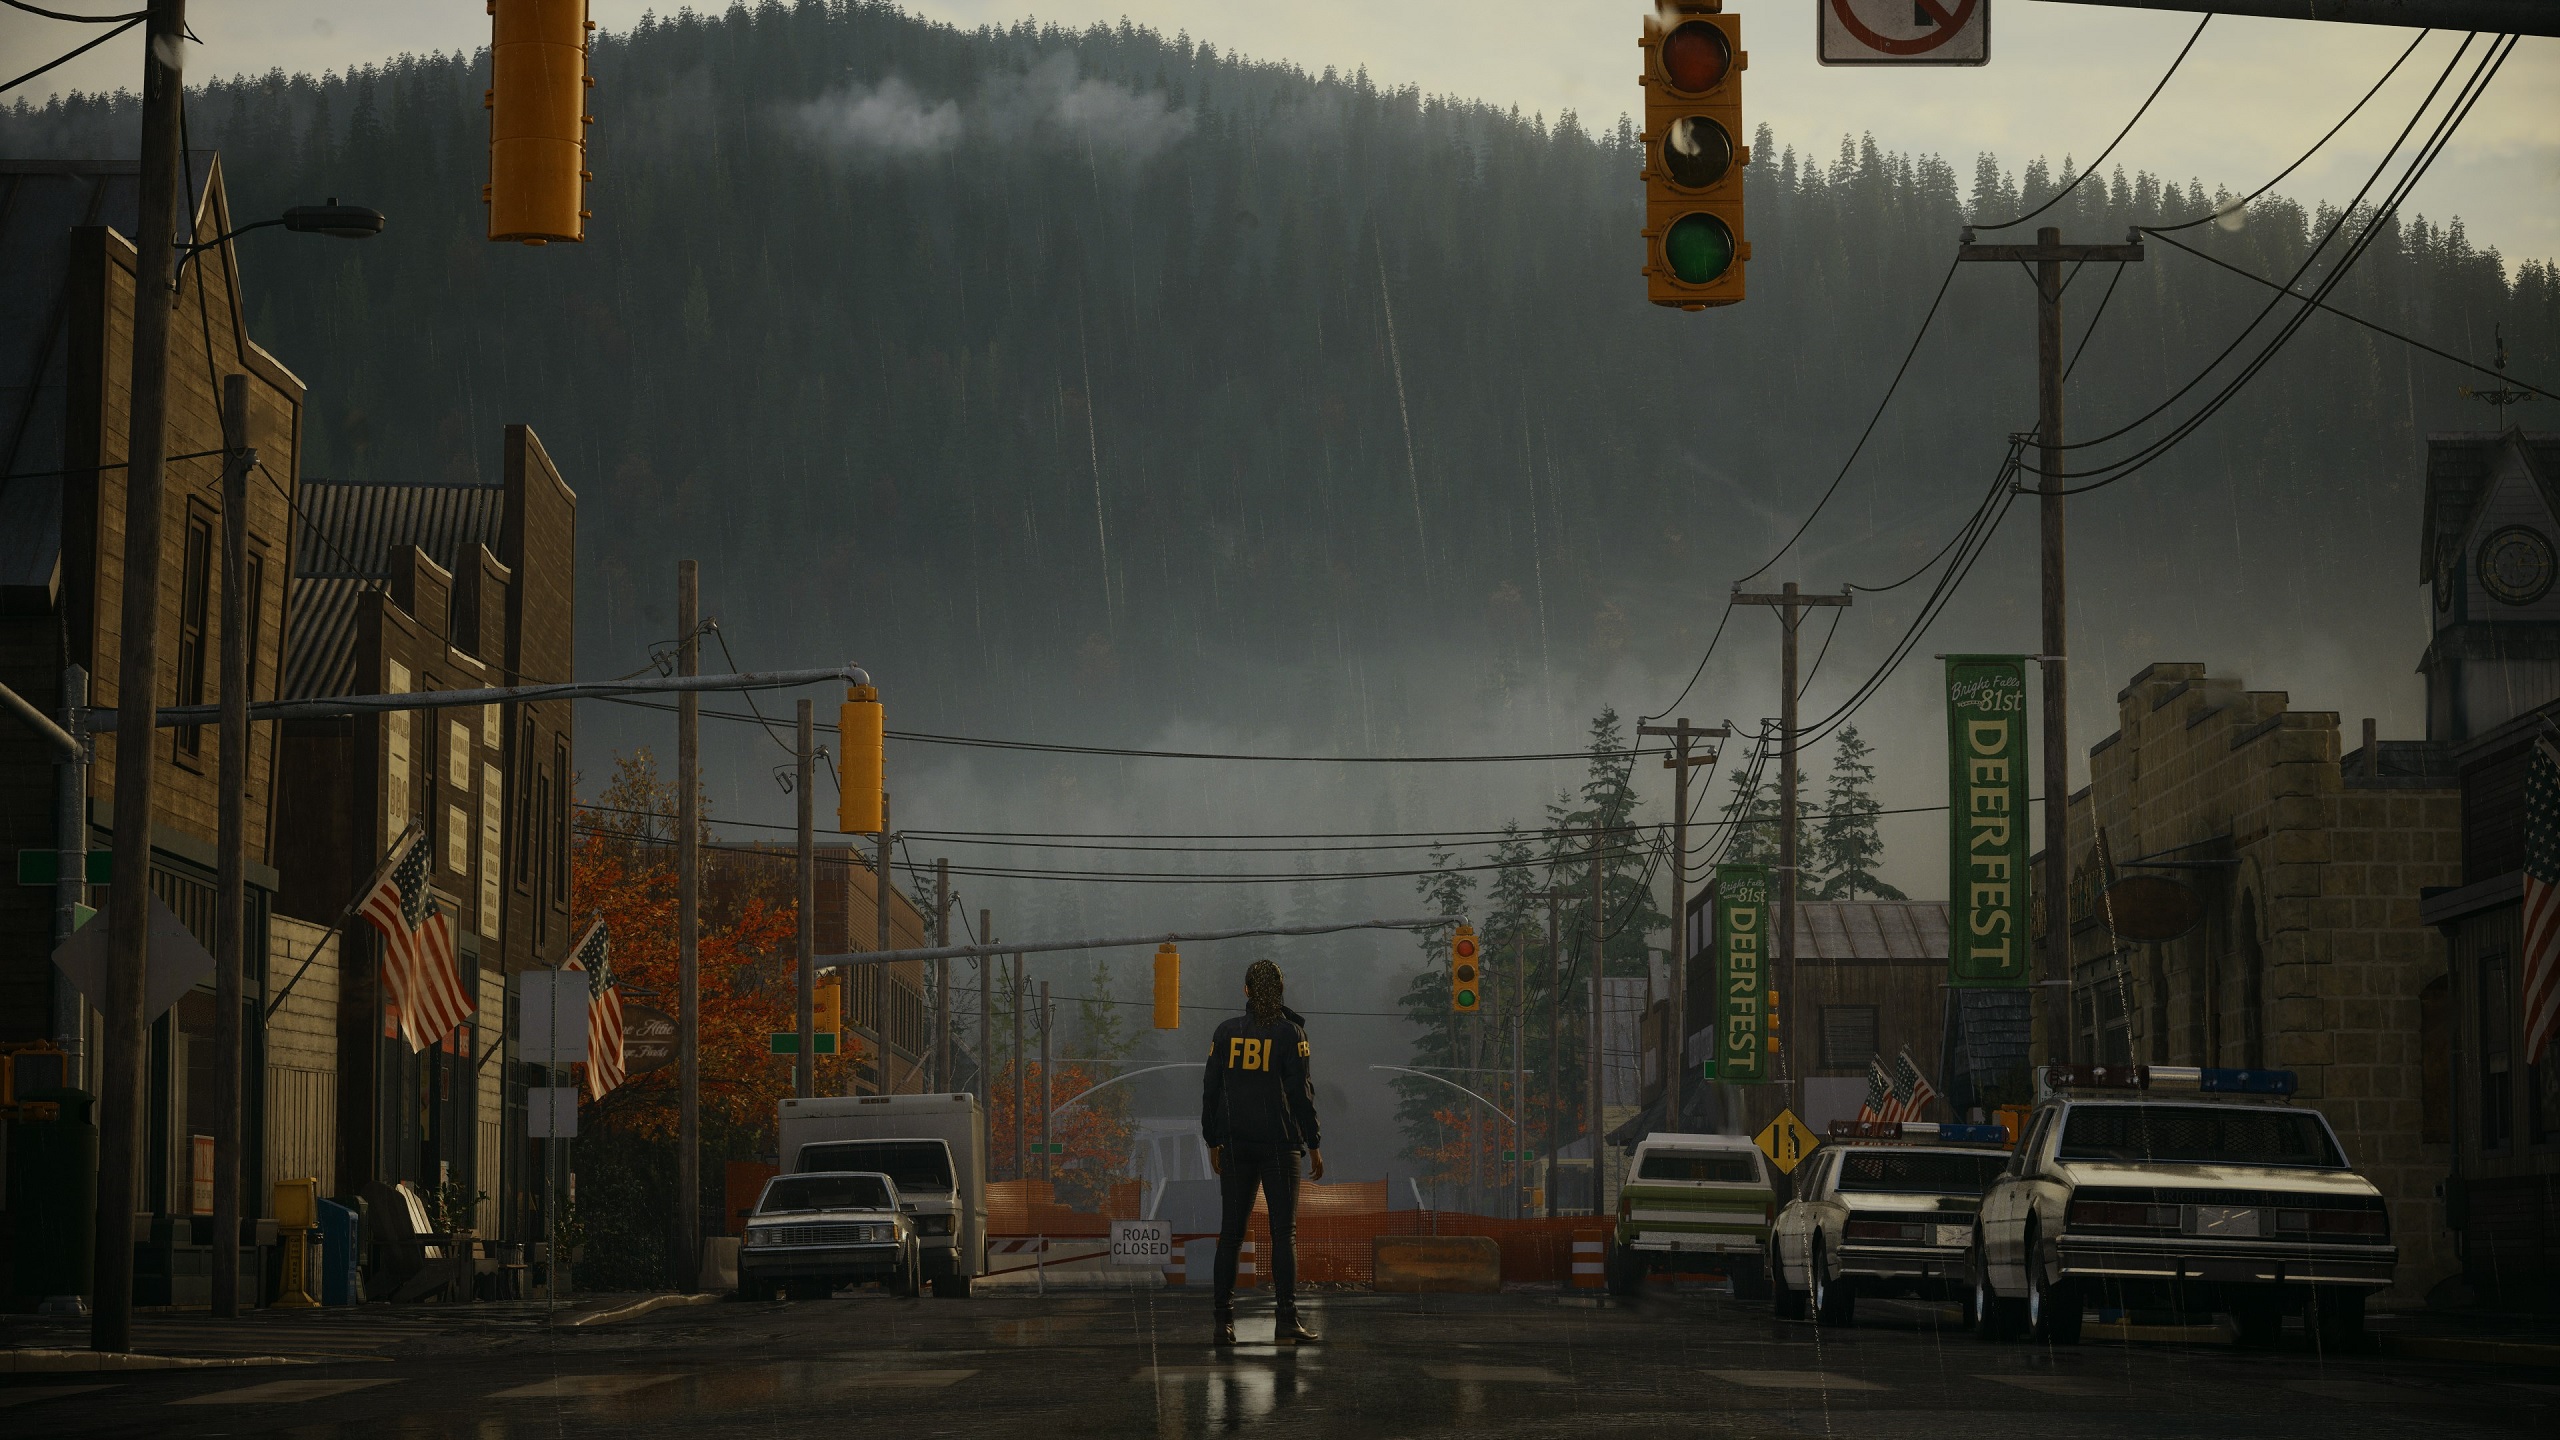 Alan Wake 2 will be 'Remedy's first survival horror game' and